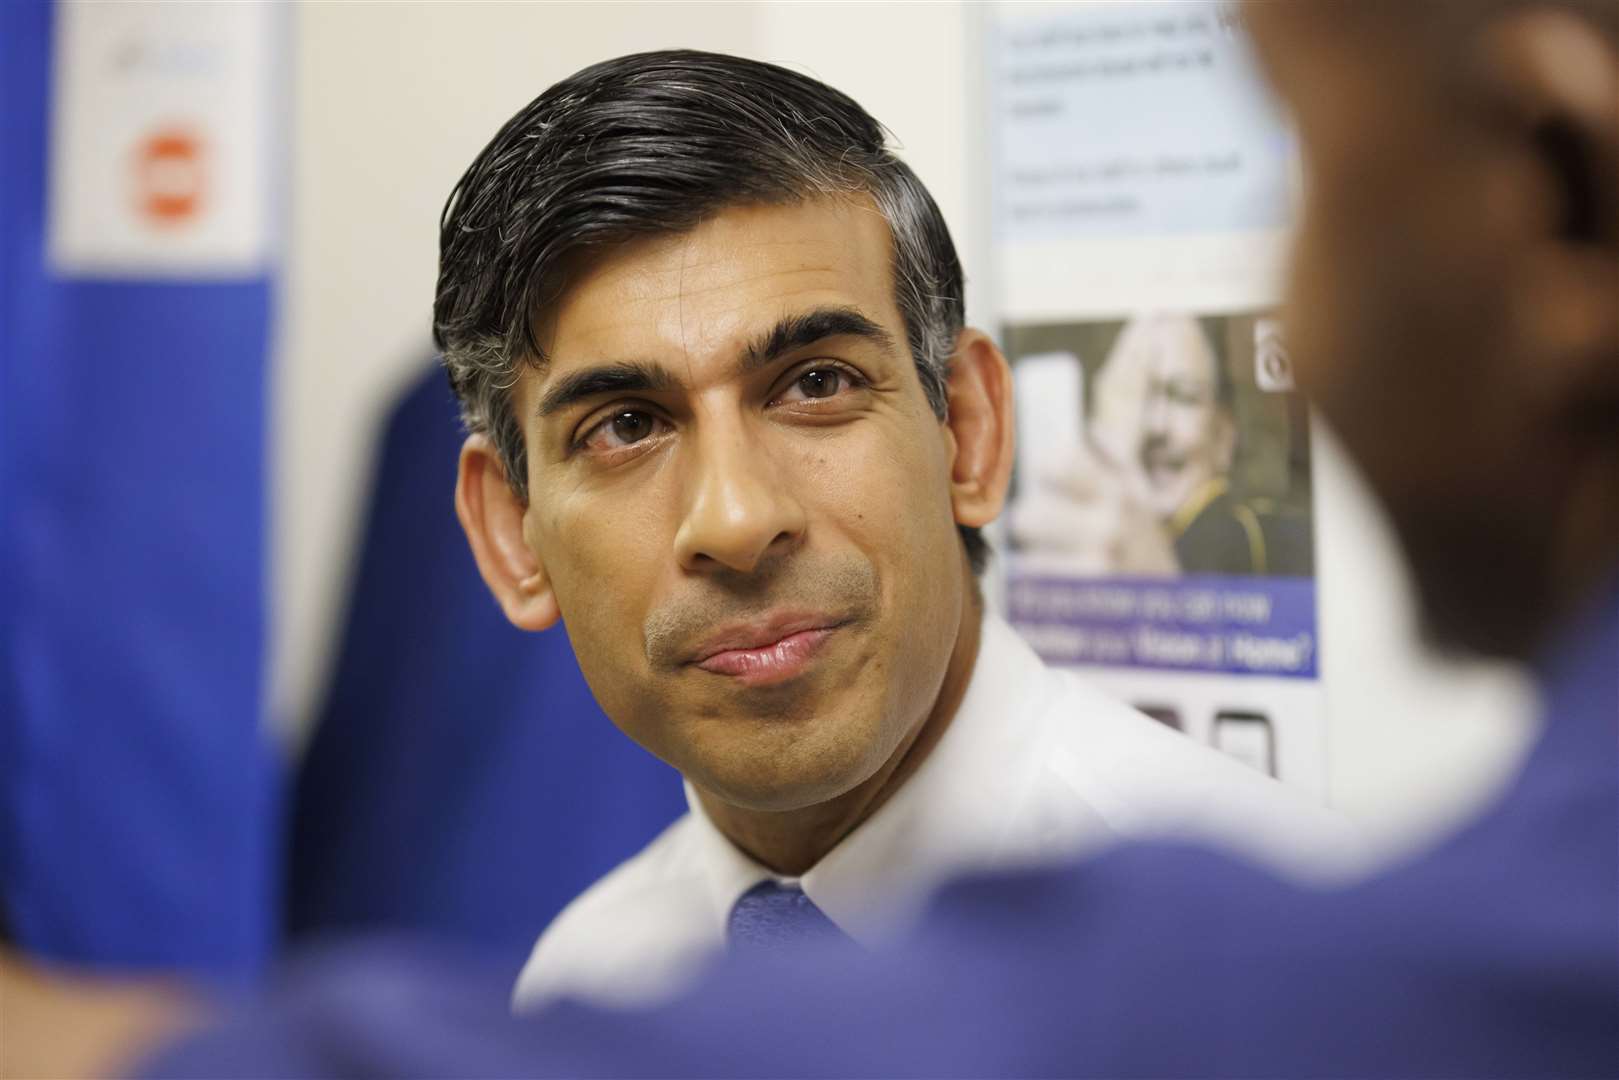 Prime Minister Rishi Sunak has made tackling waiting lists a priority (Jaime Lorriman/The Daily Telegraph/PA)